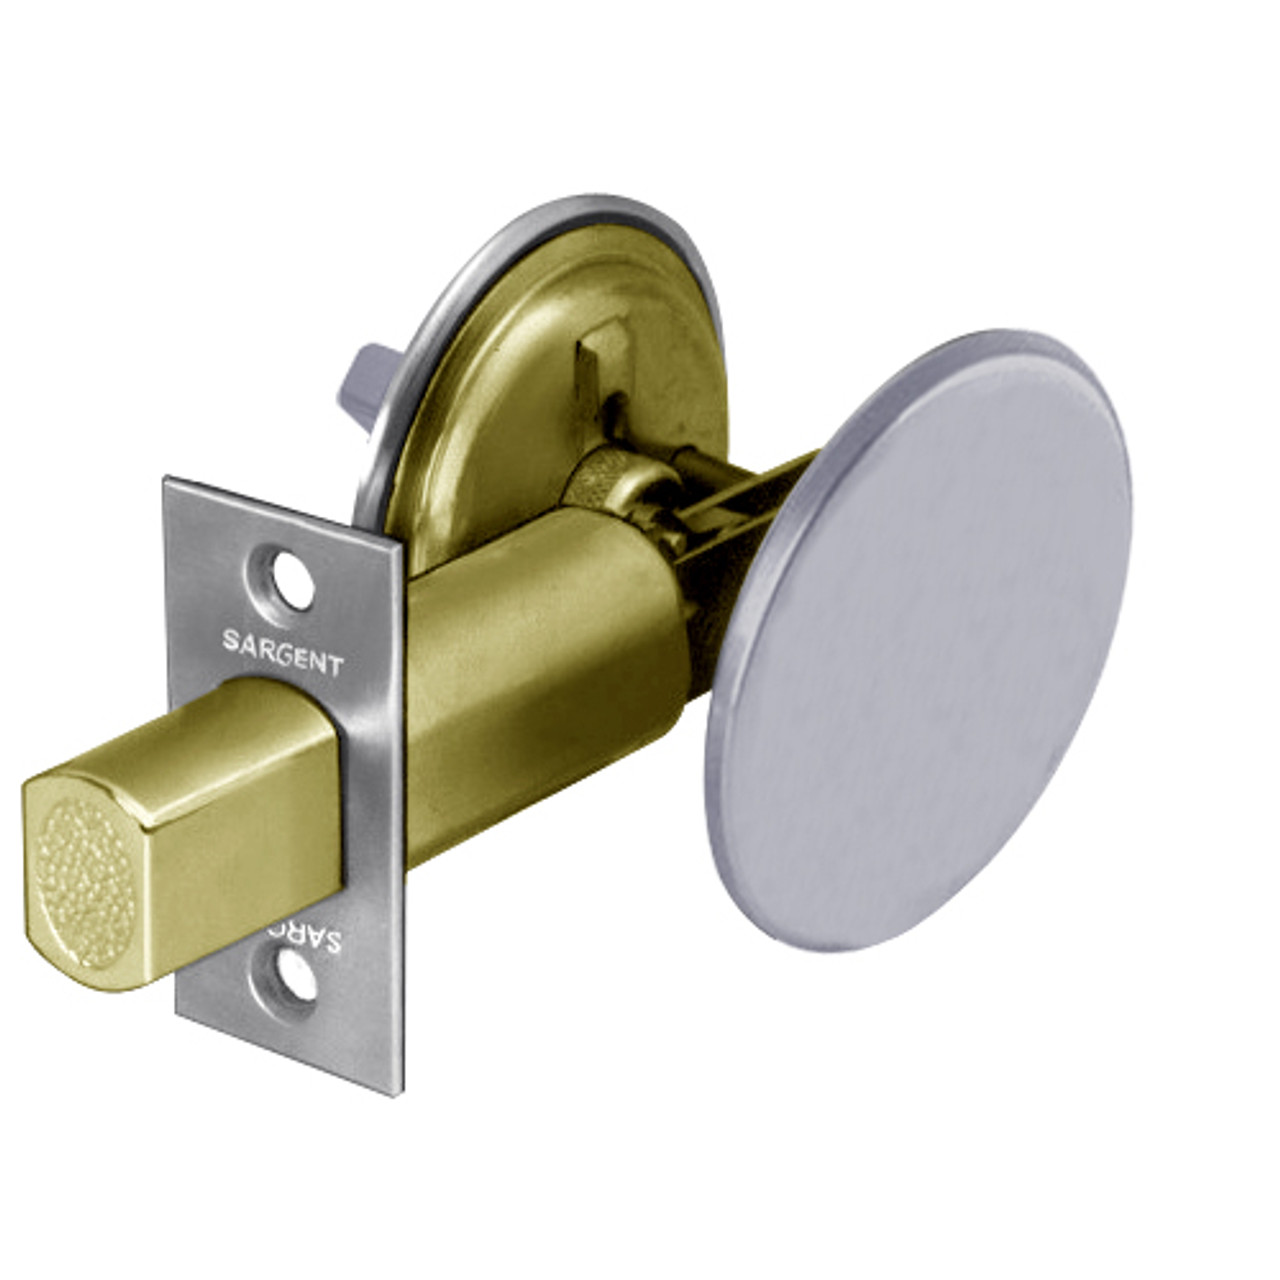 489-26 Sargent 480 Series Thumbturn Auxiliary Deadbolt Lock with Blank Plate in Bright Chrome